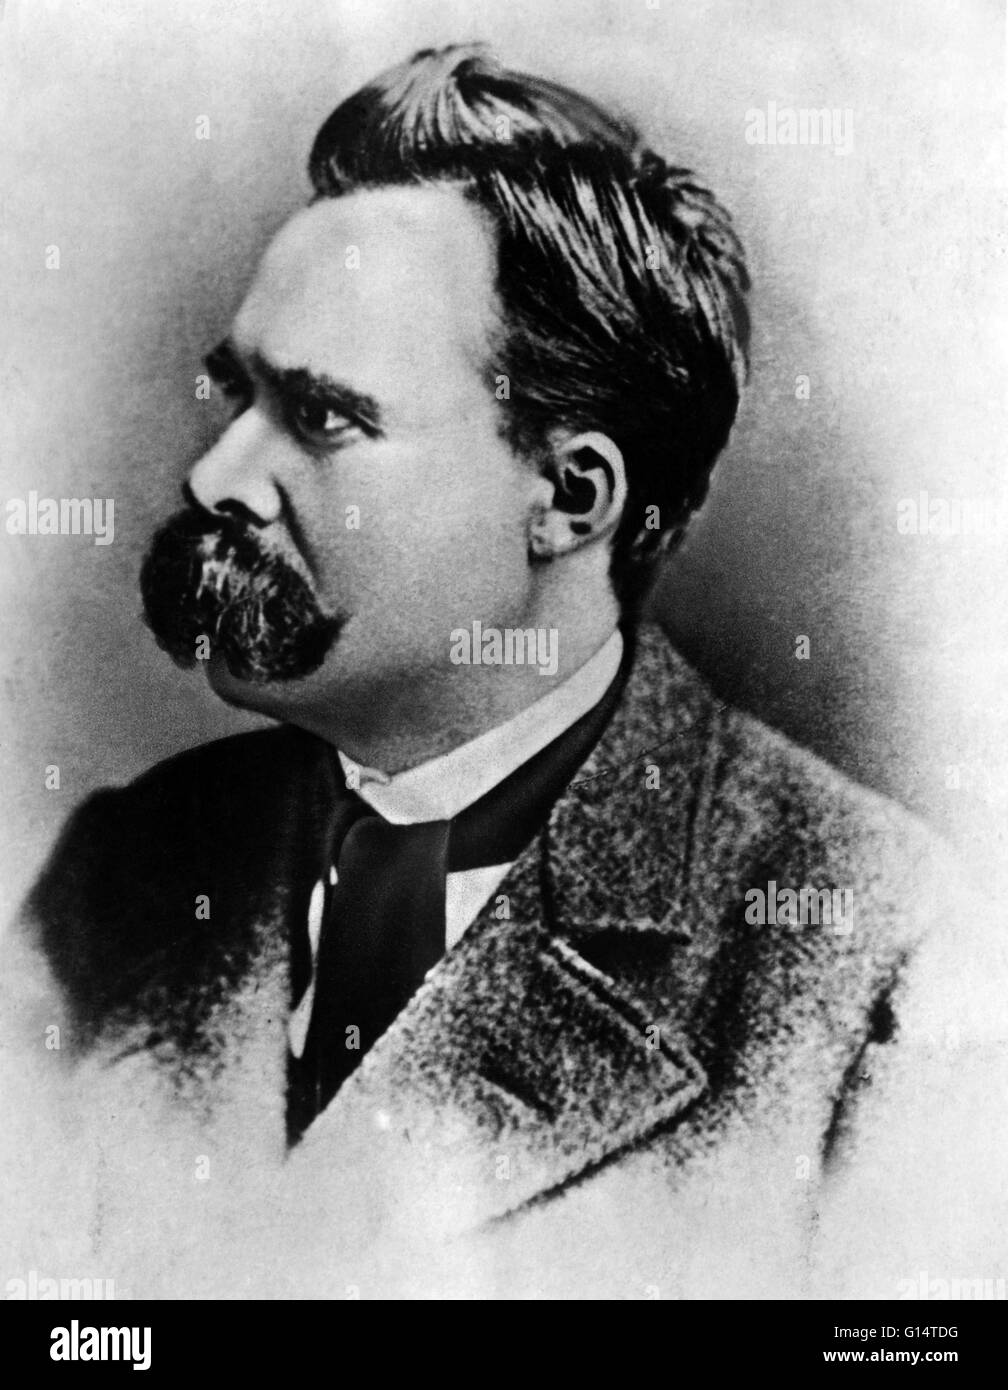 Friedrich Wilhelm Nietzsche (October 15, 1844 - August 25, 1900) was a German philosopher, poet, composer and classical philologist. He wrote critical texts on religion, morality, contemporary culture, philosophy and science. Nietzsche's influence on mode Stock Photo